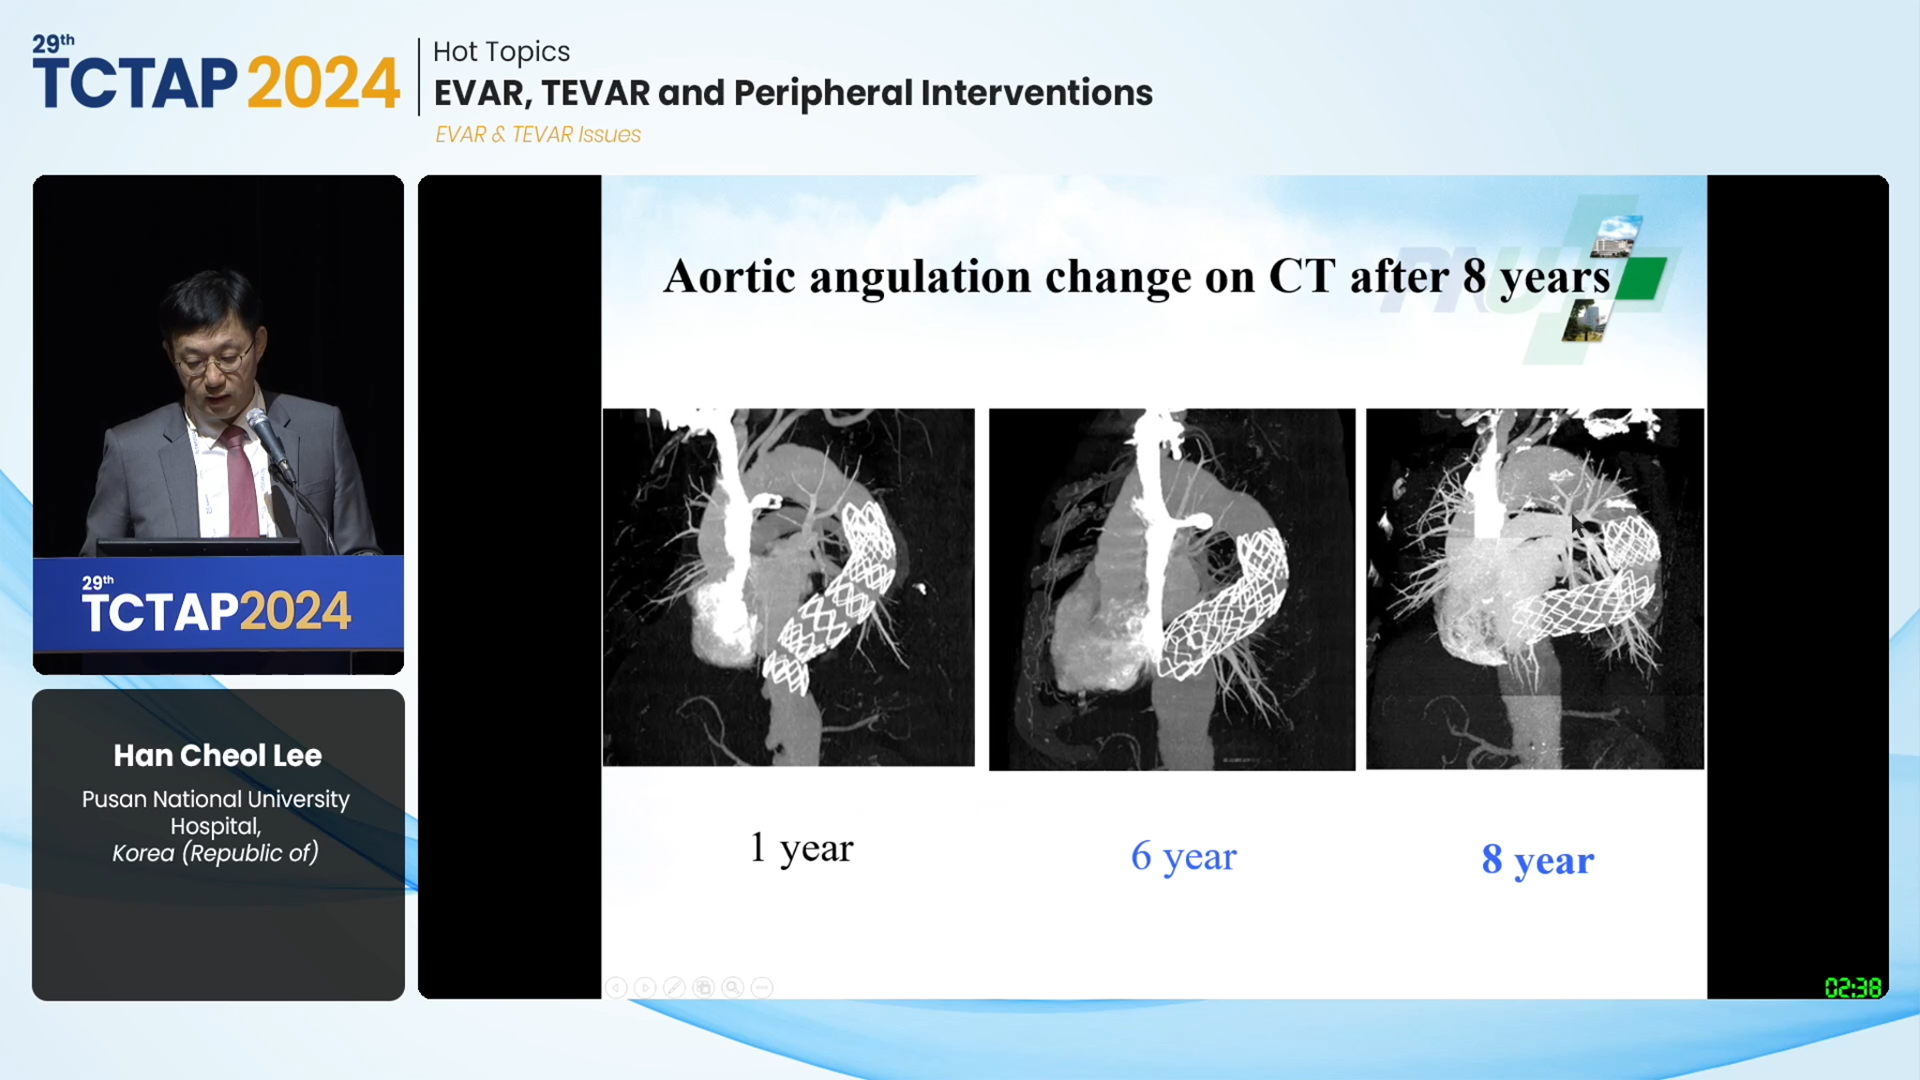 [Hot Topics] EVAR, TEVAR and Peripheral Interventions